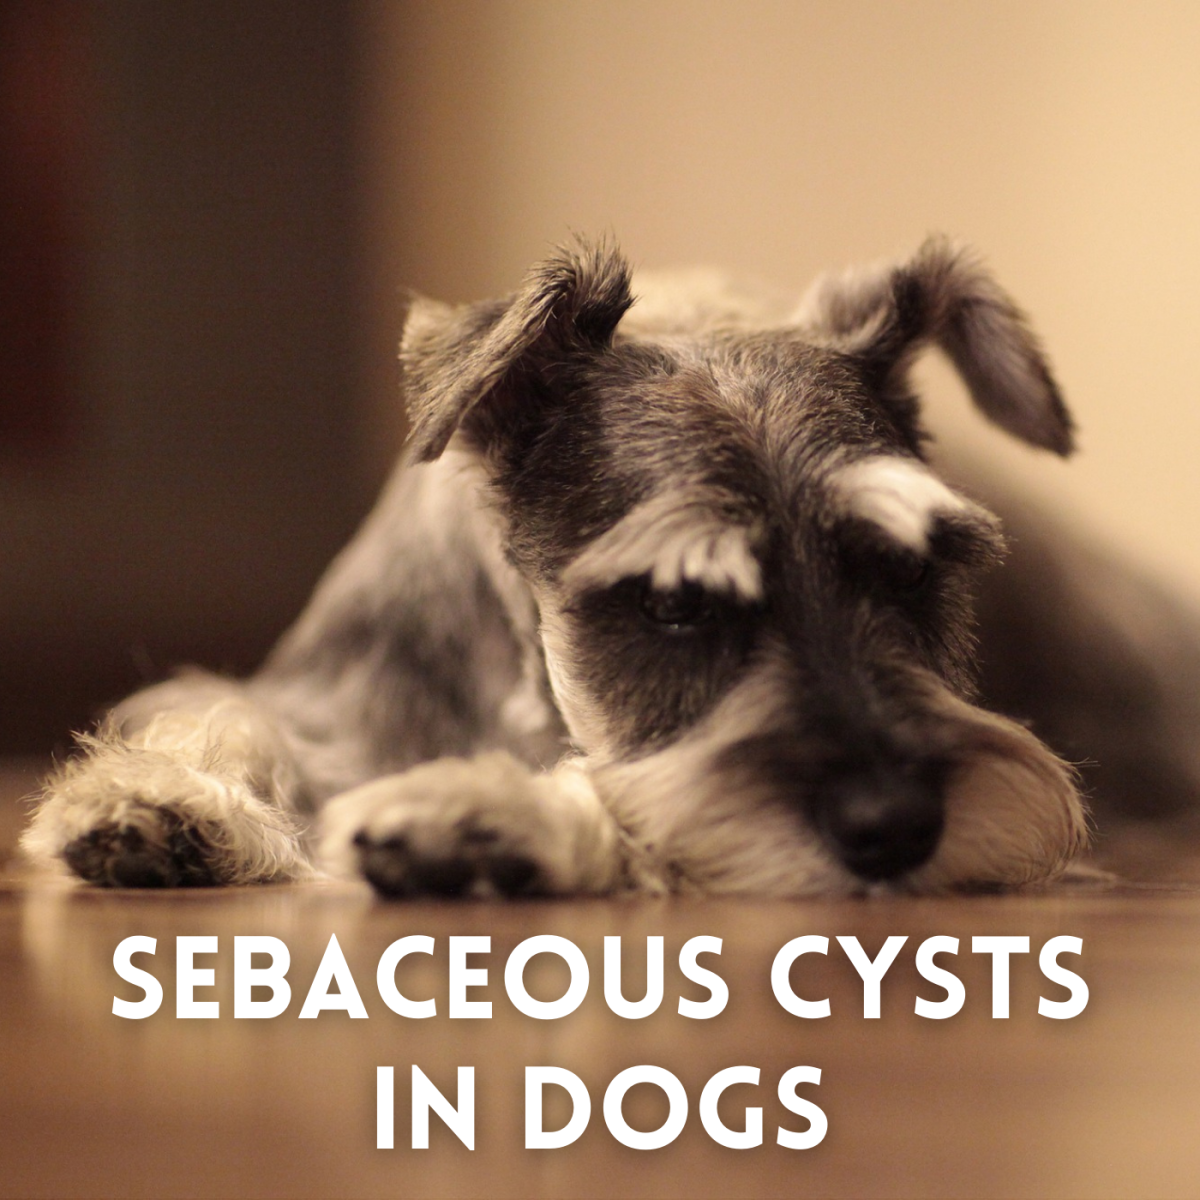 If you find an odd bump on your dog, it could be a sebaceous cyst. Learn more about these swellings and when to see the vet.